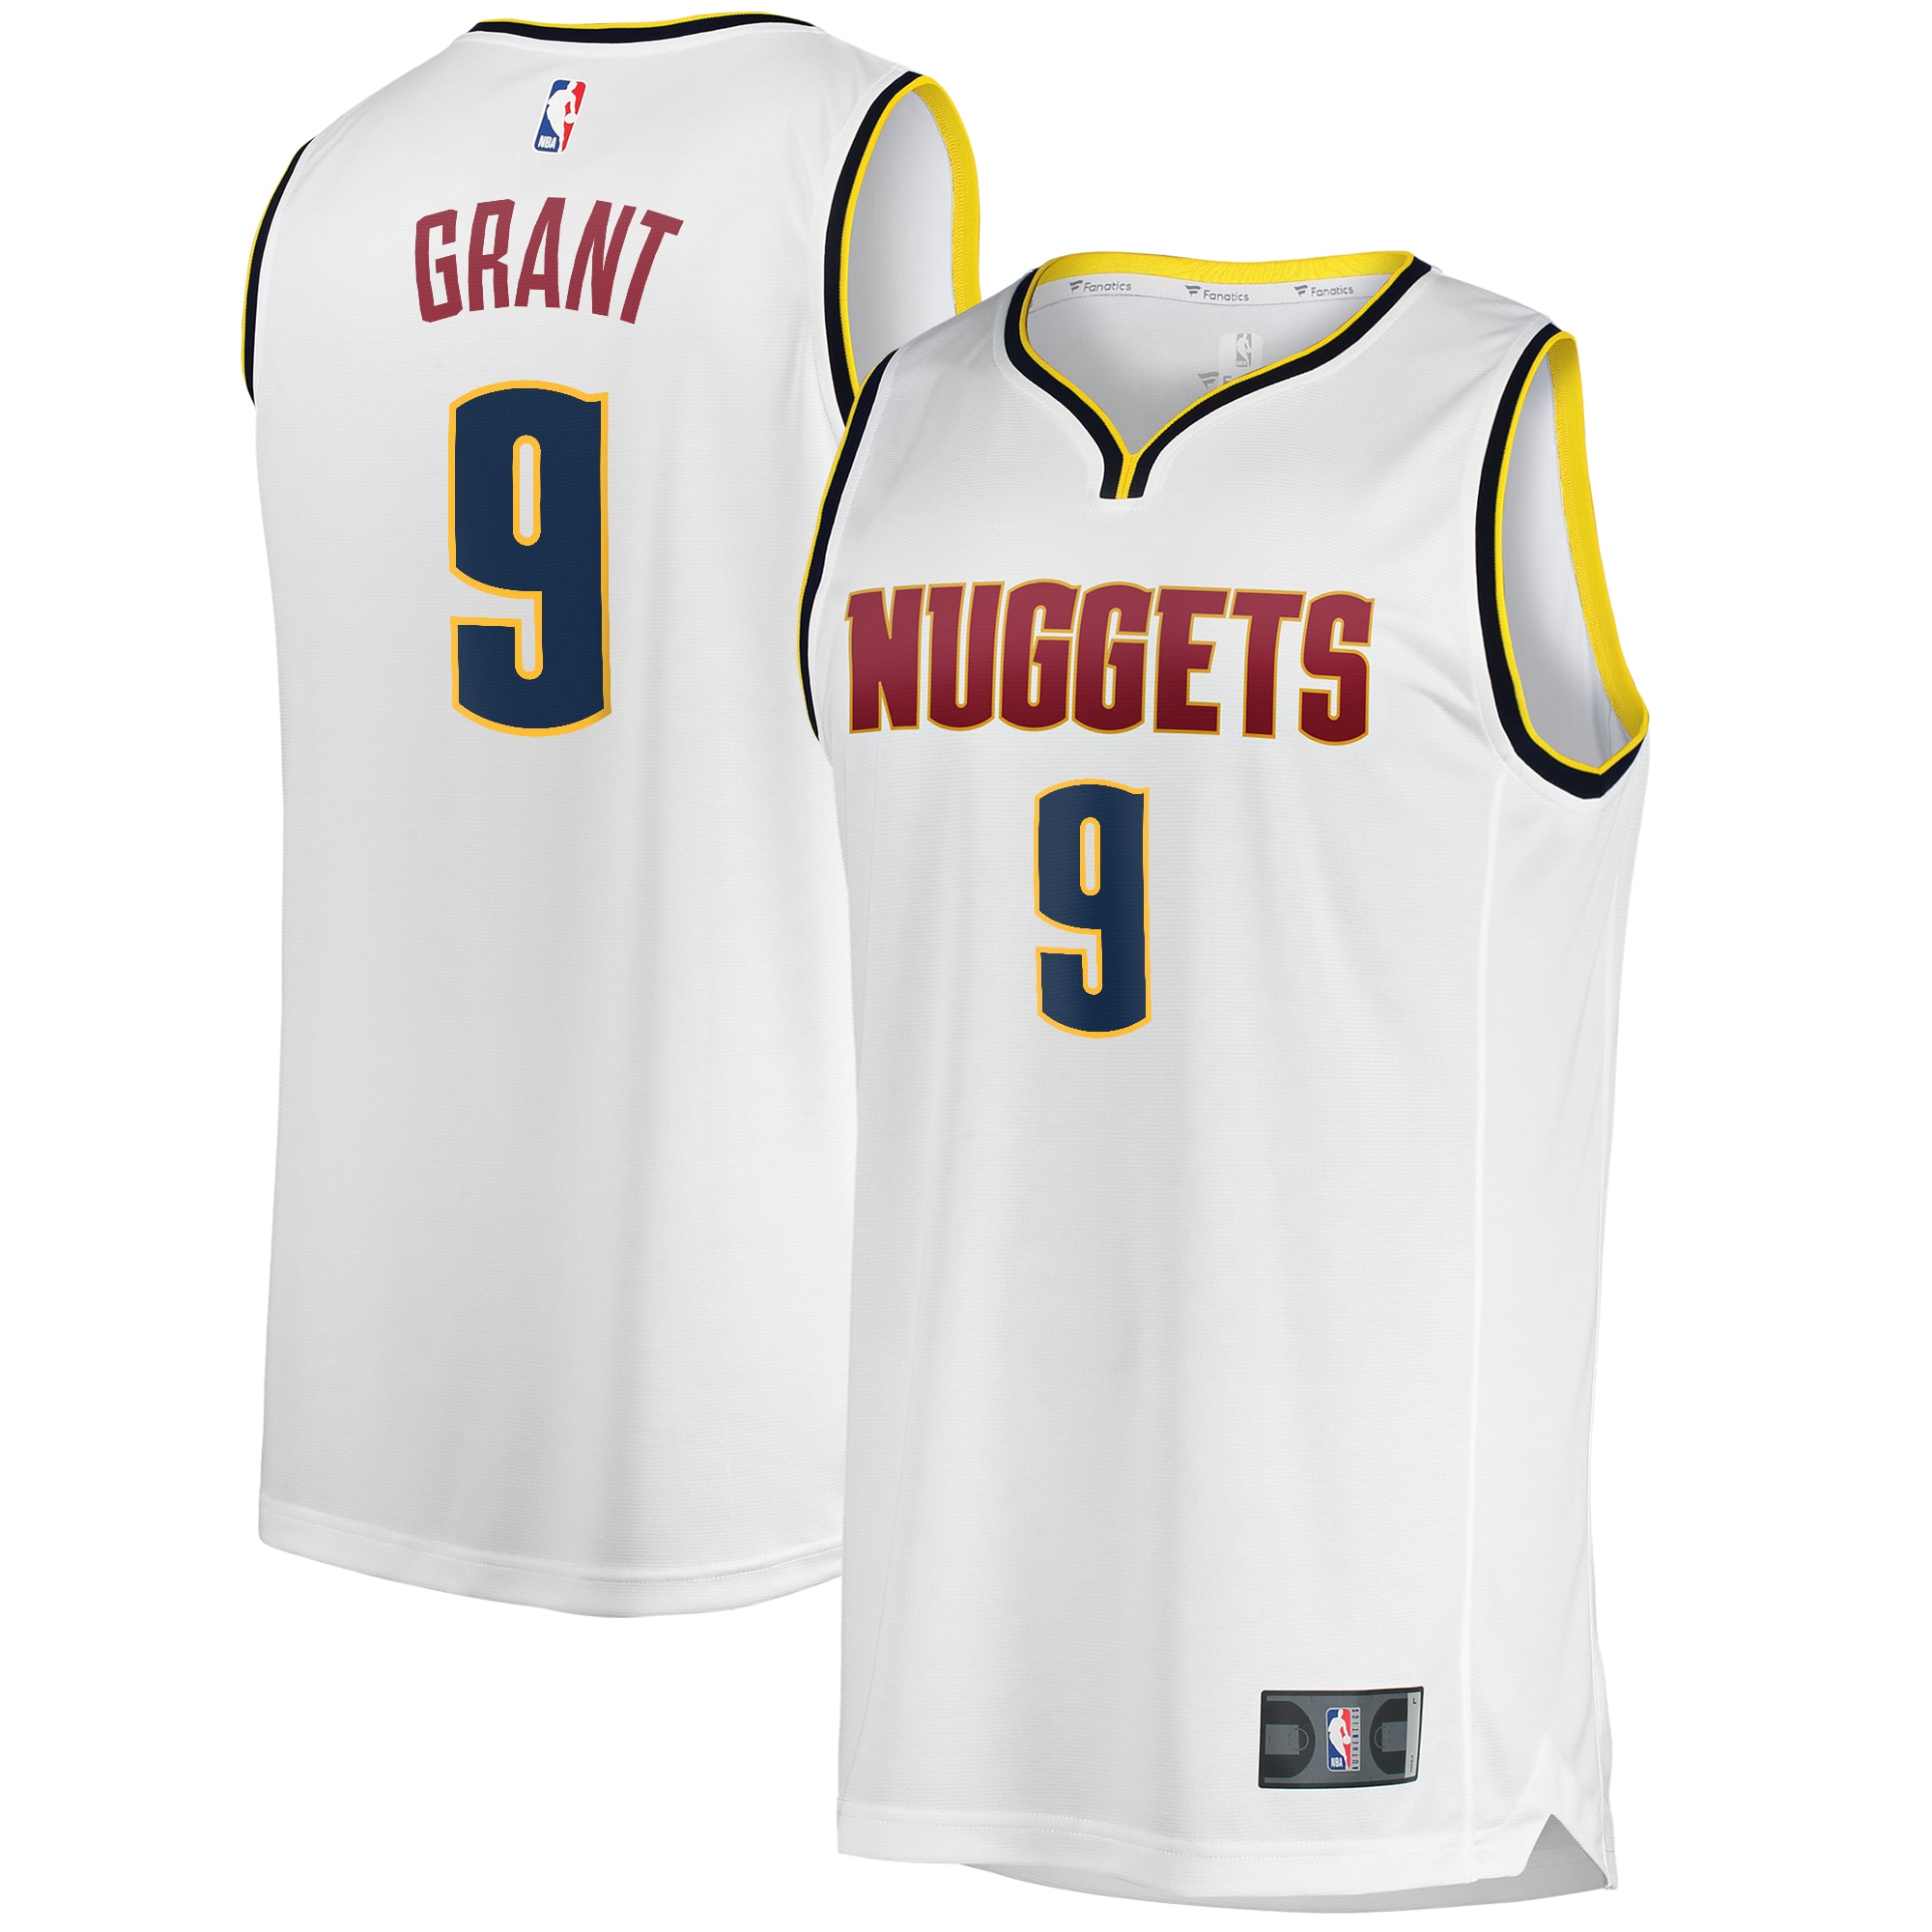 nuggets jersey white